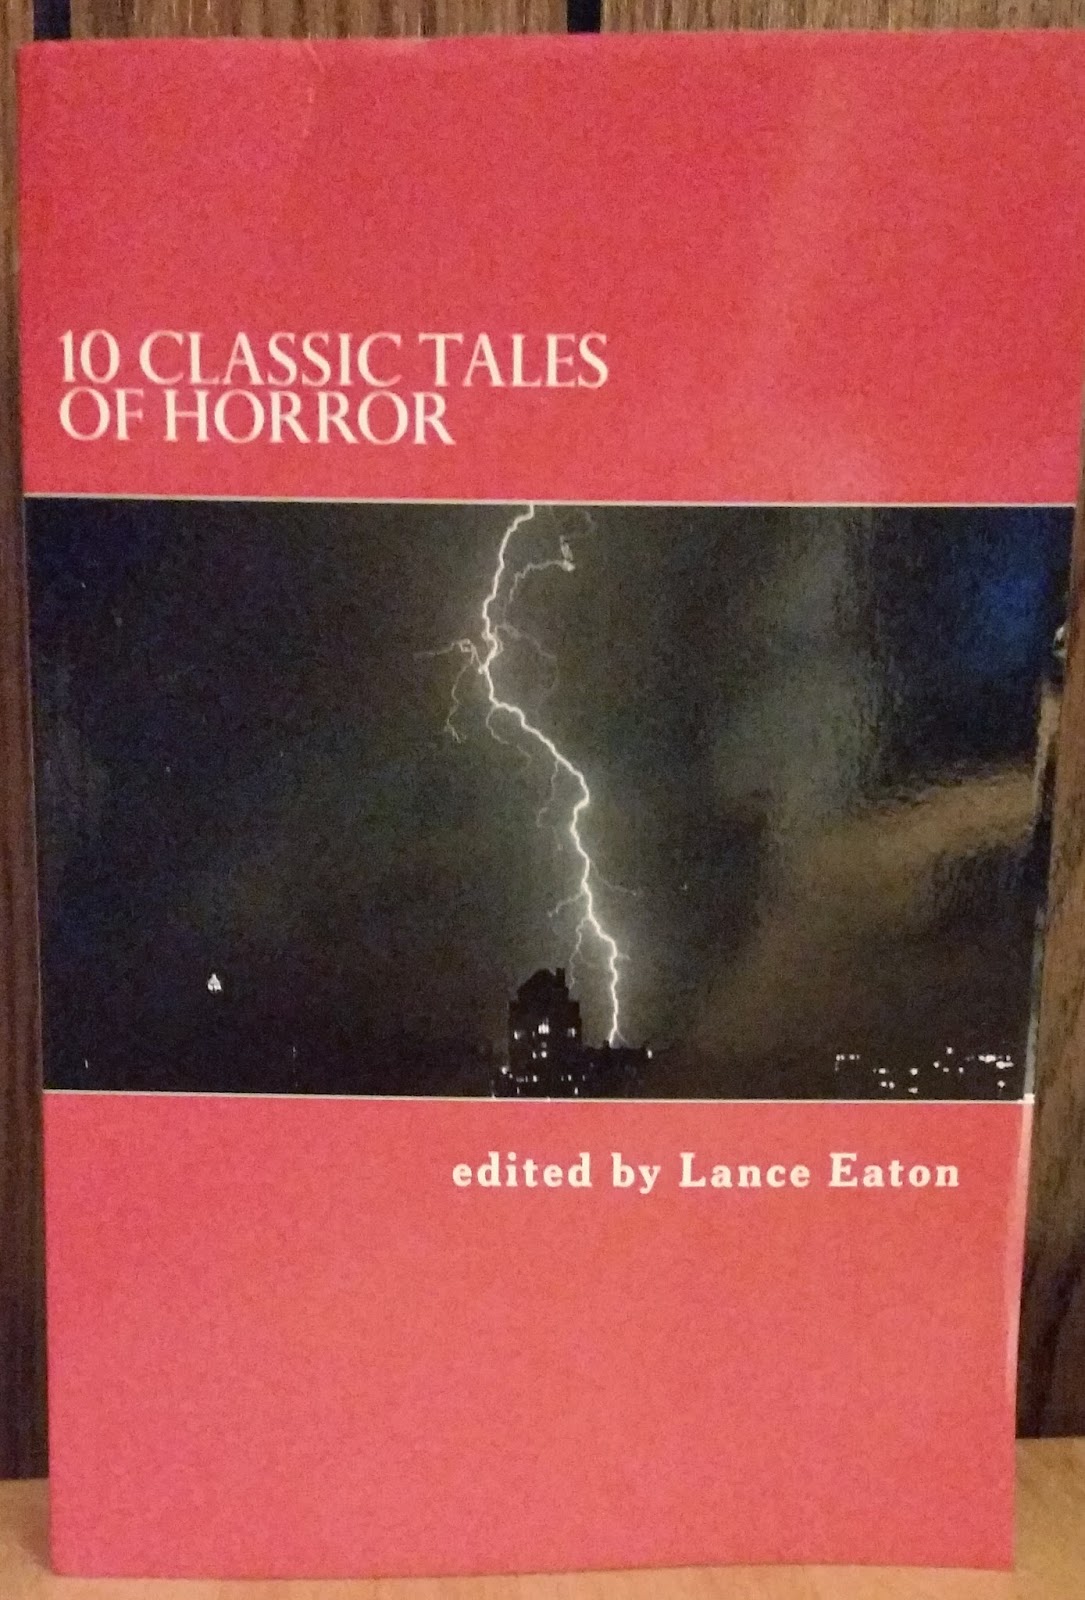 Book Cover - 10 Classic Tales of Horror - Lance Eaton